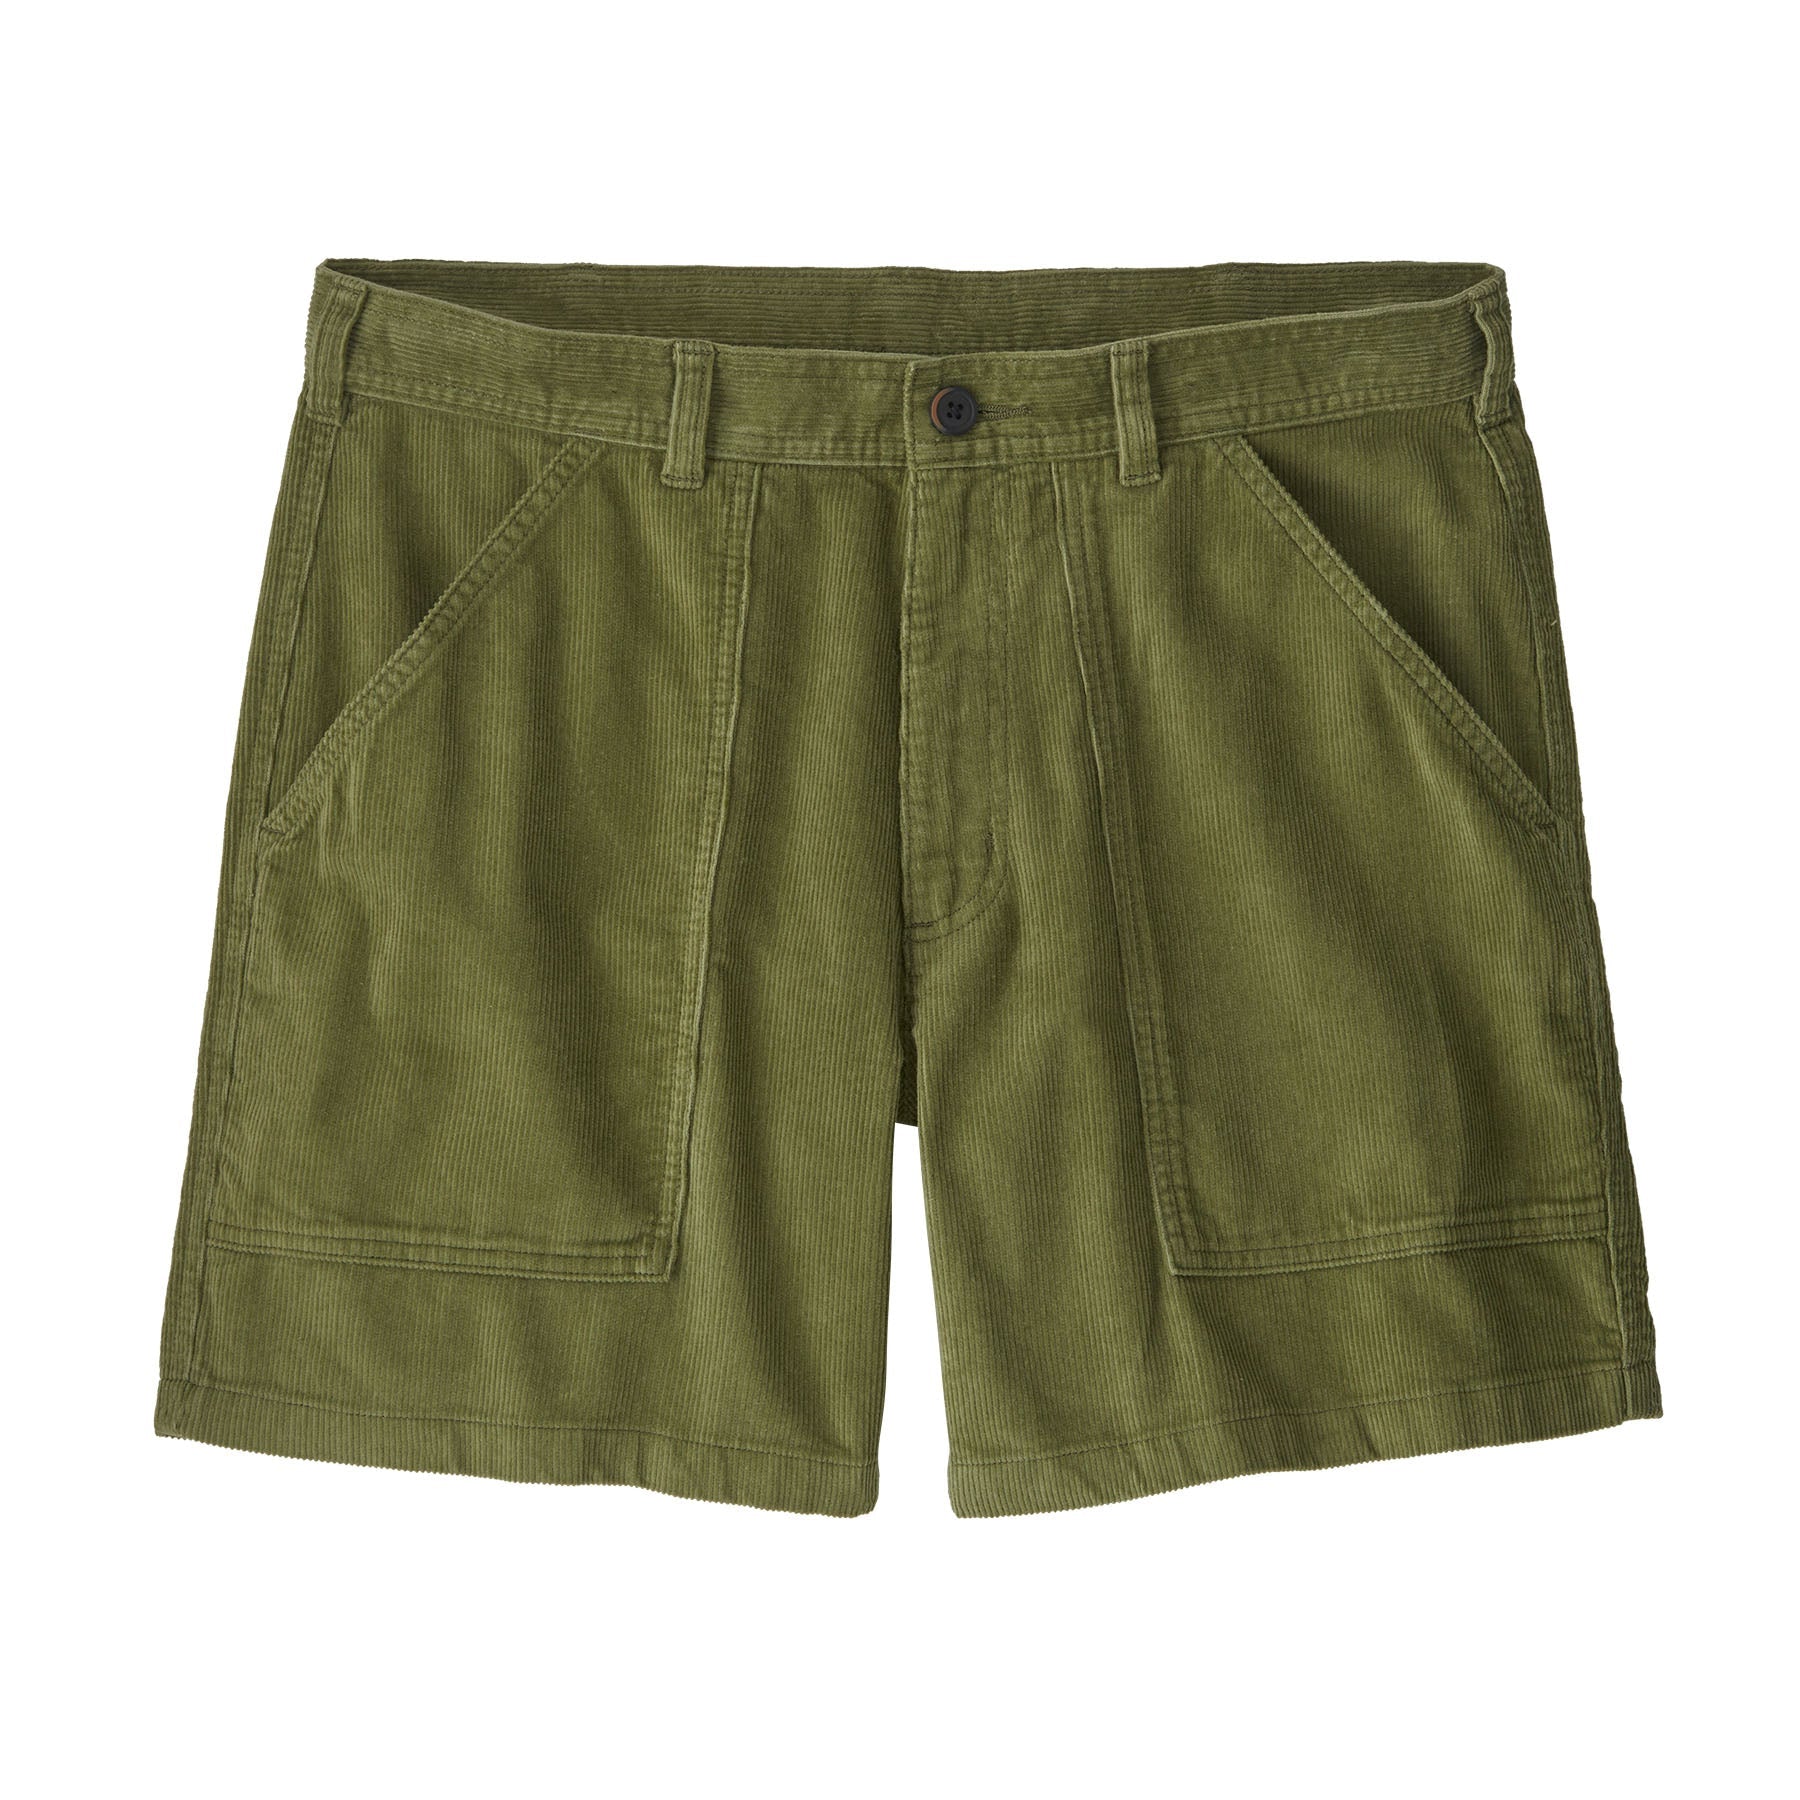 M's Organic Cotton Cord Utility Shorts - 6 in.